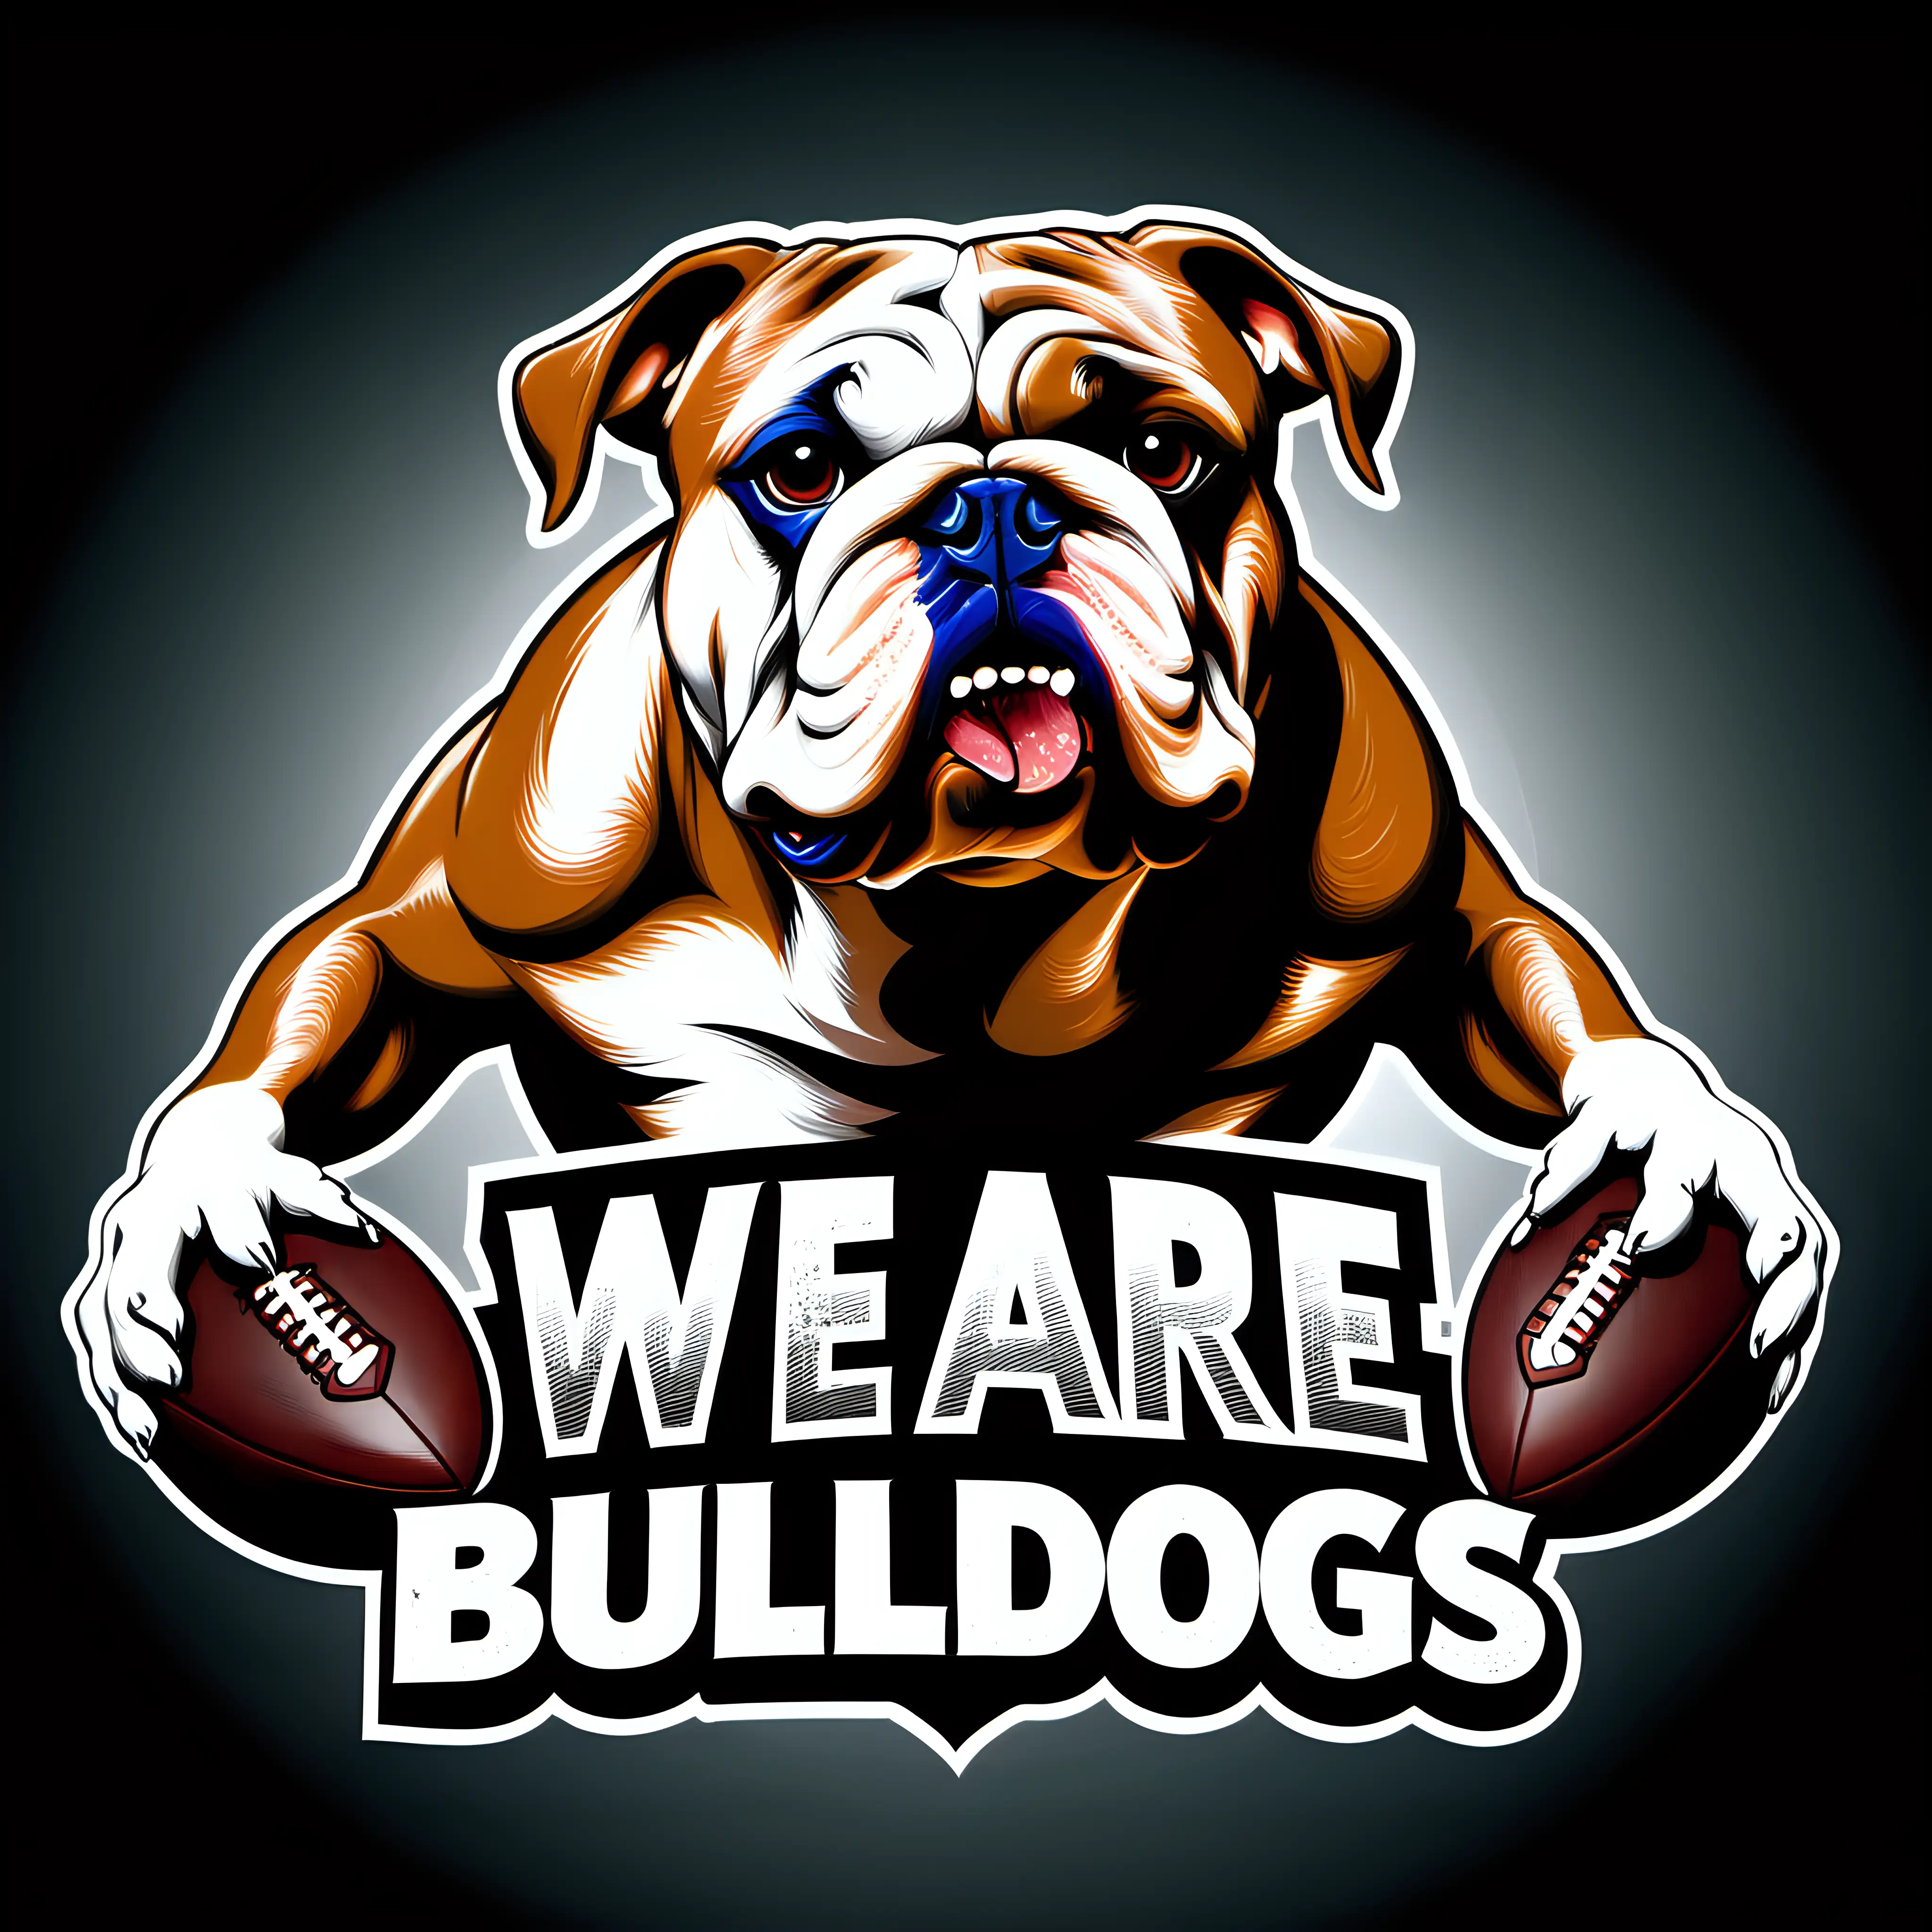 WE ARE BULDOGS, FOOTBALL, NO BACKGROUND